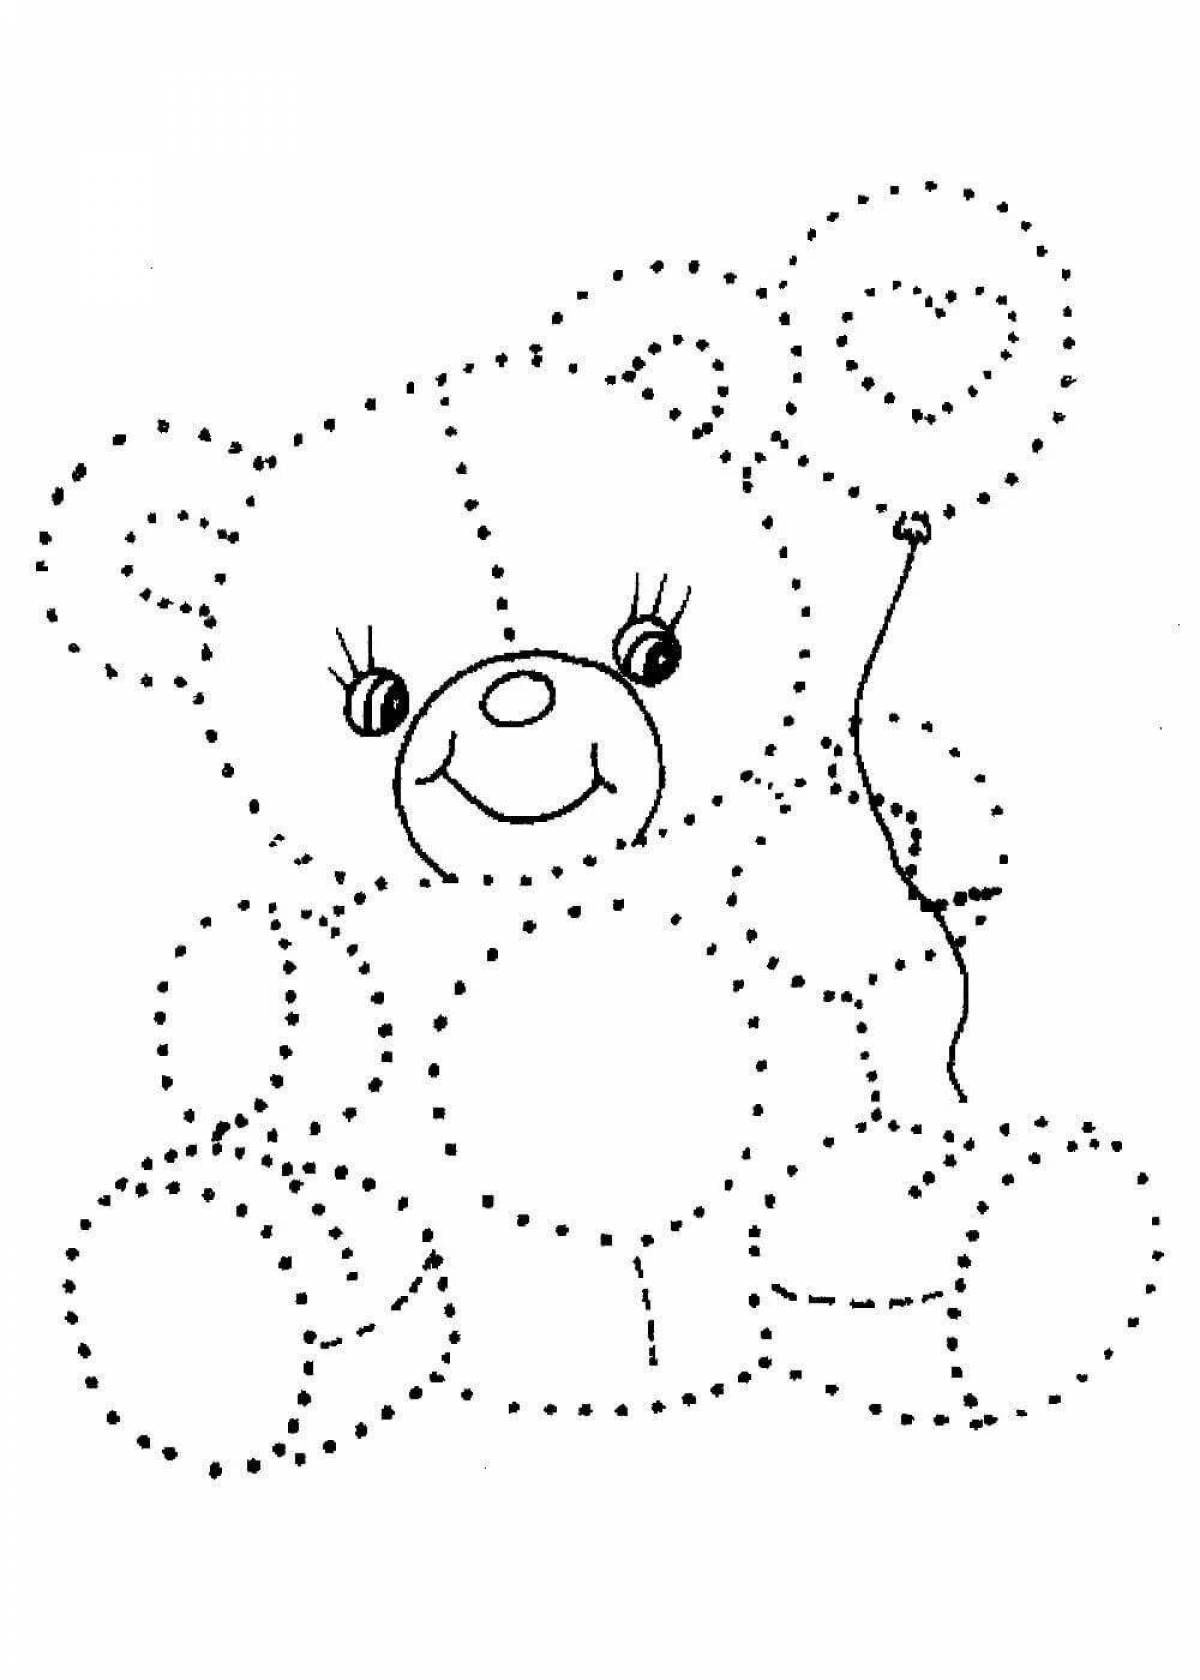 Attractive 'trace the dots' coloring page for 5-7 year olds